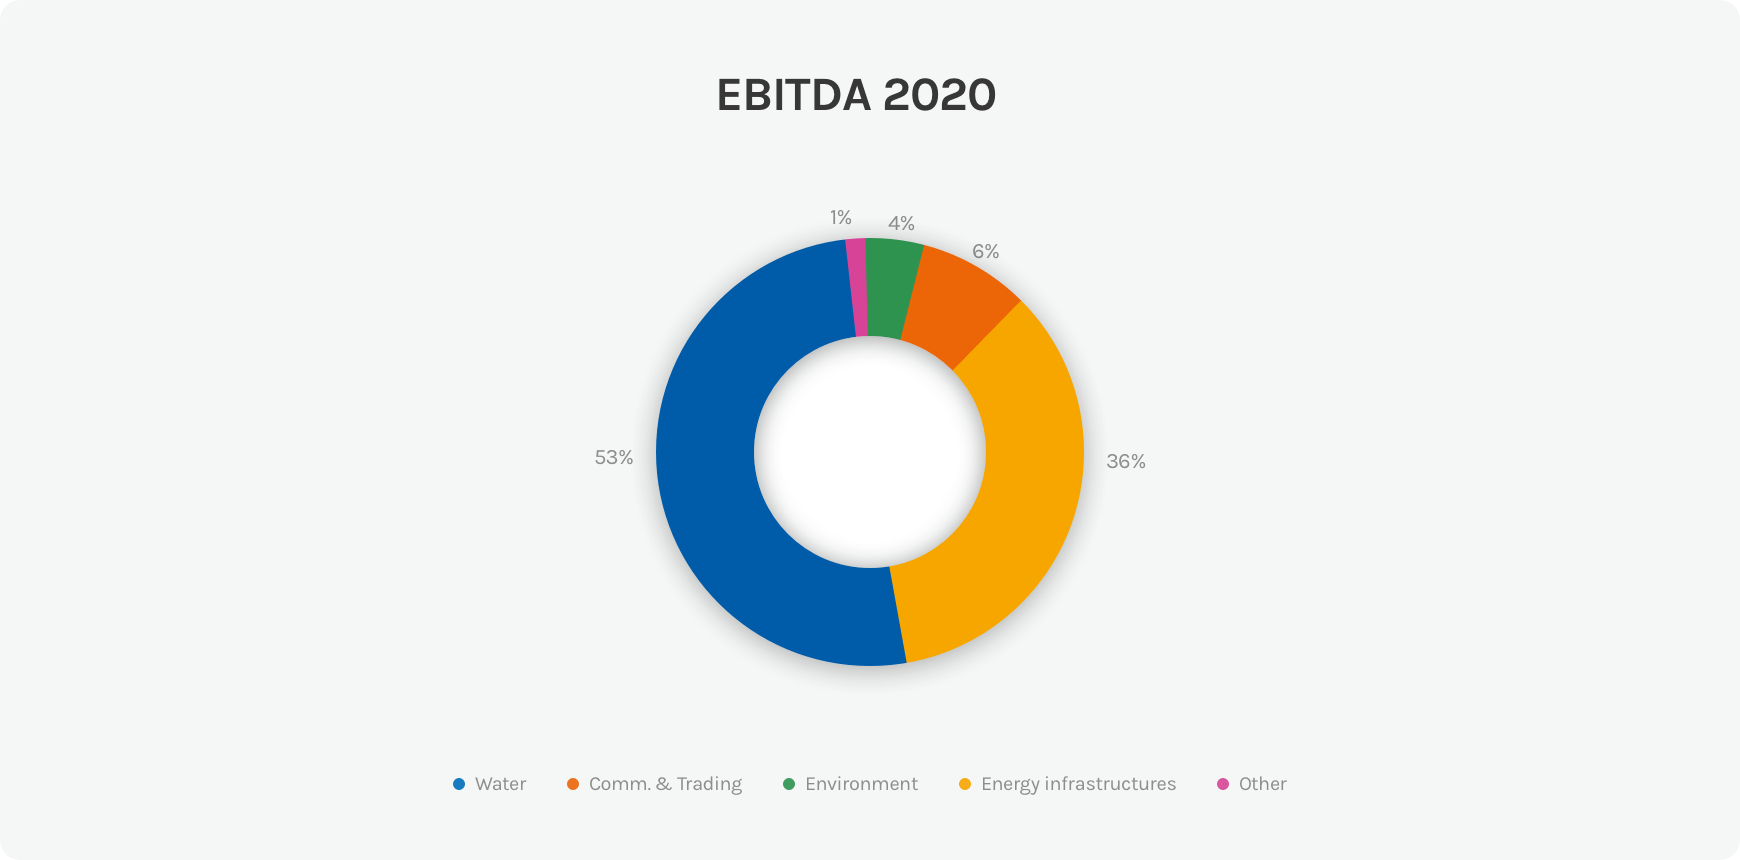 Diagram of the EBITDA of the Acea Group in 2020